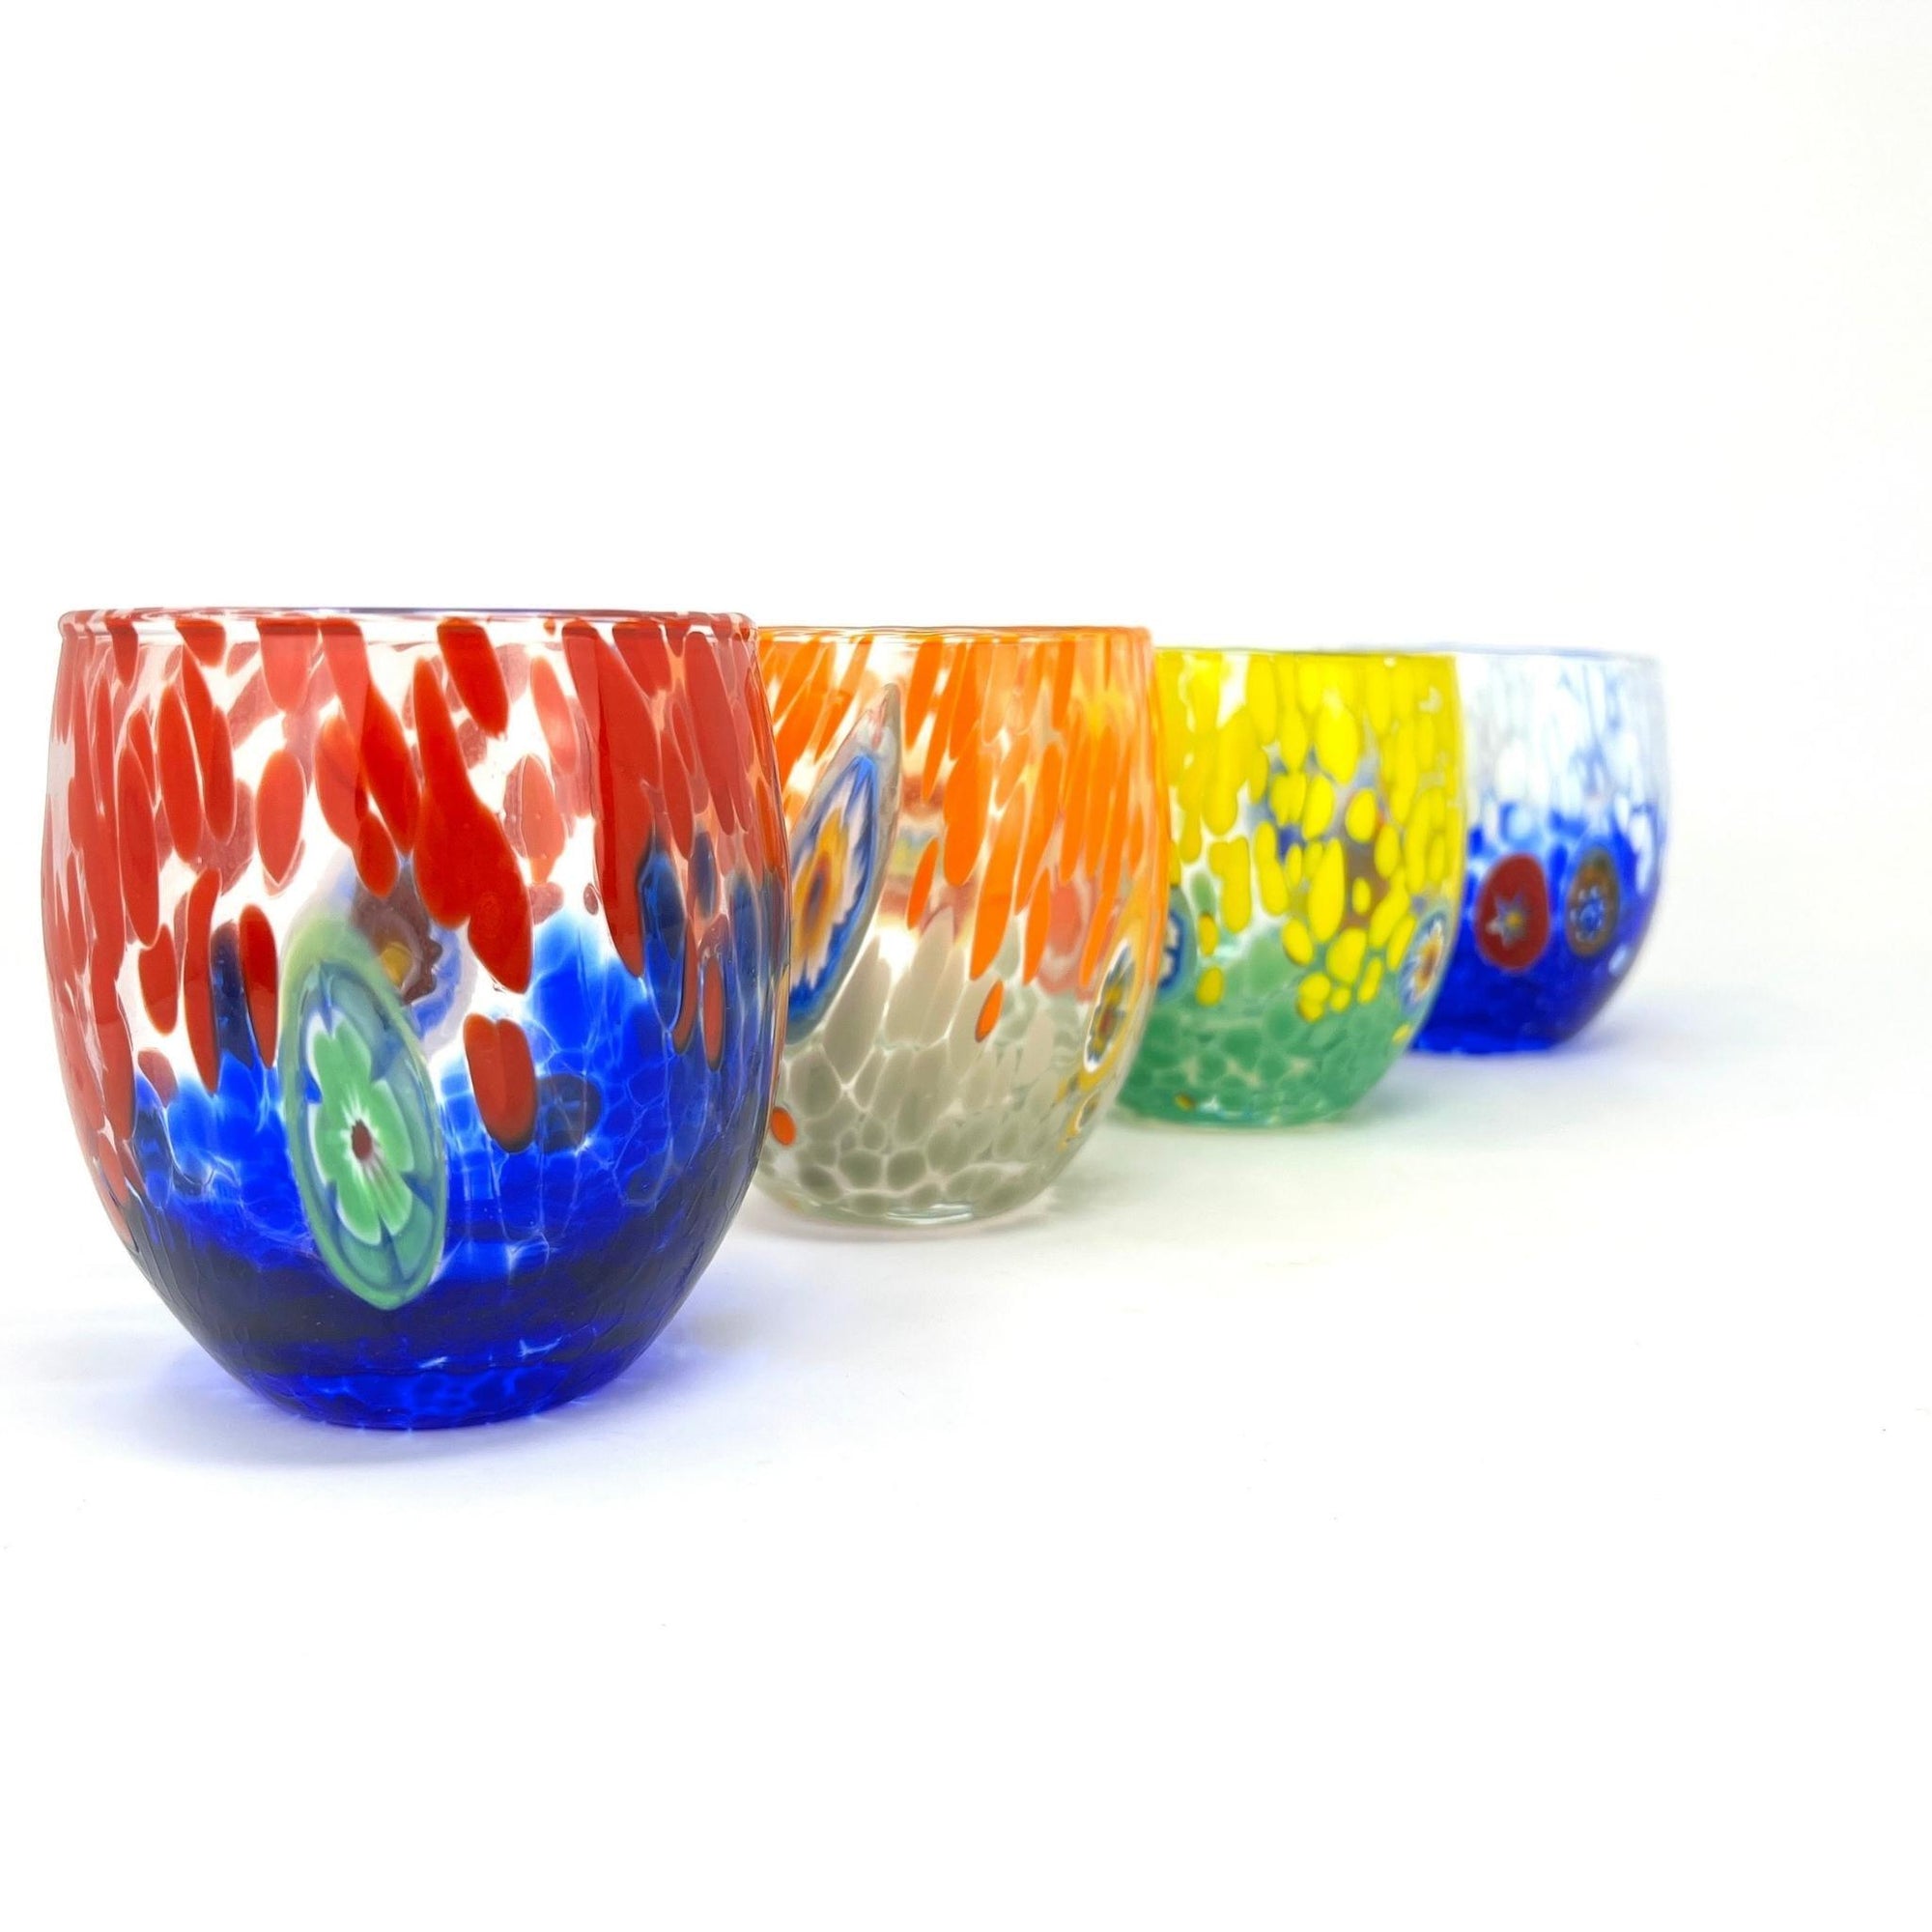 Set of 4 Nico Stemless Wine Glasses, Multi-color tumblers, Made in Italy at MyItalianDecor